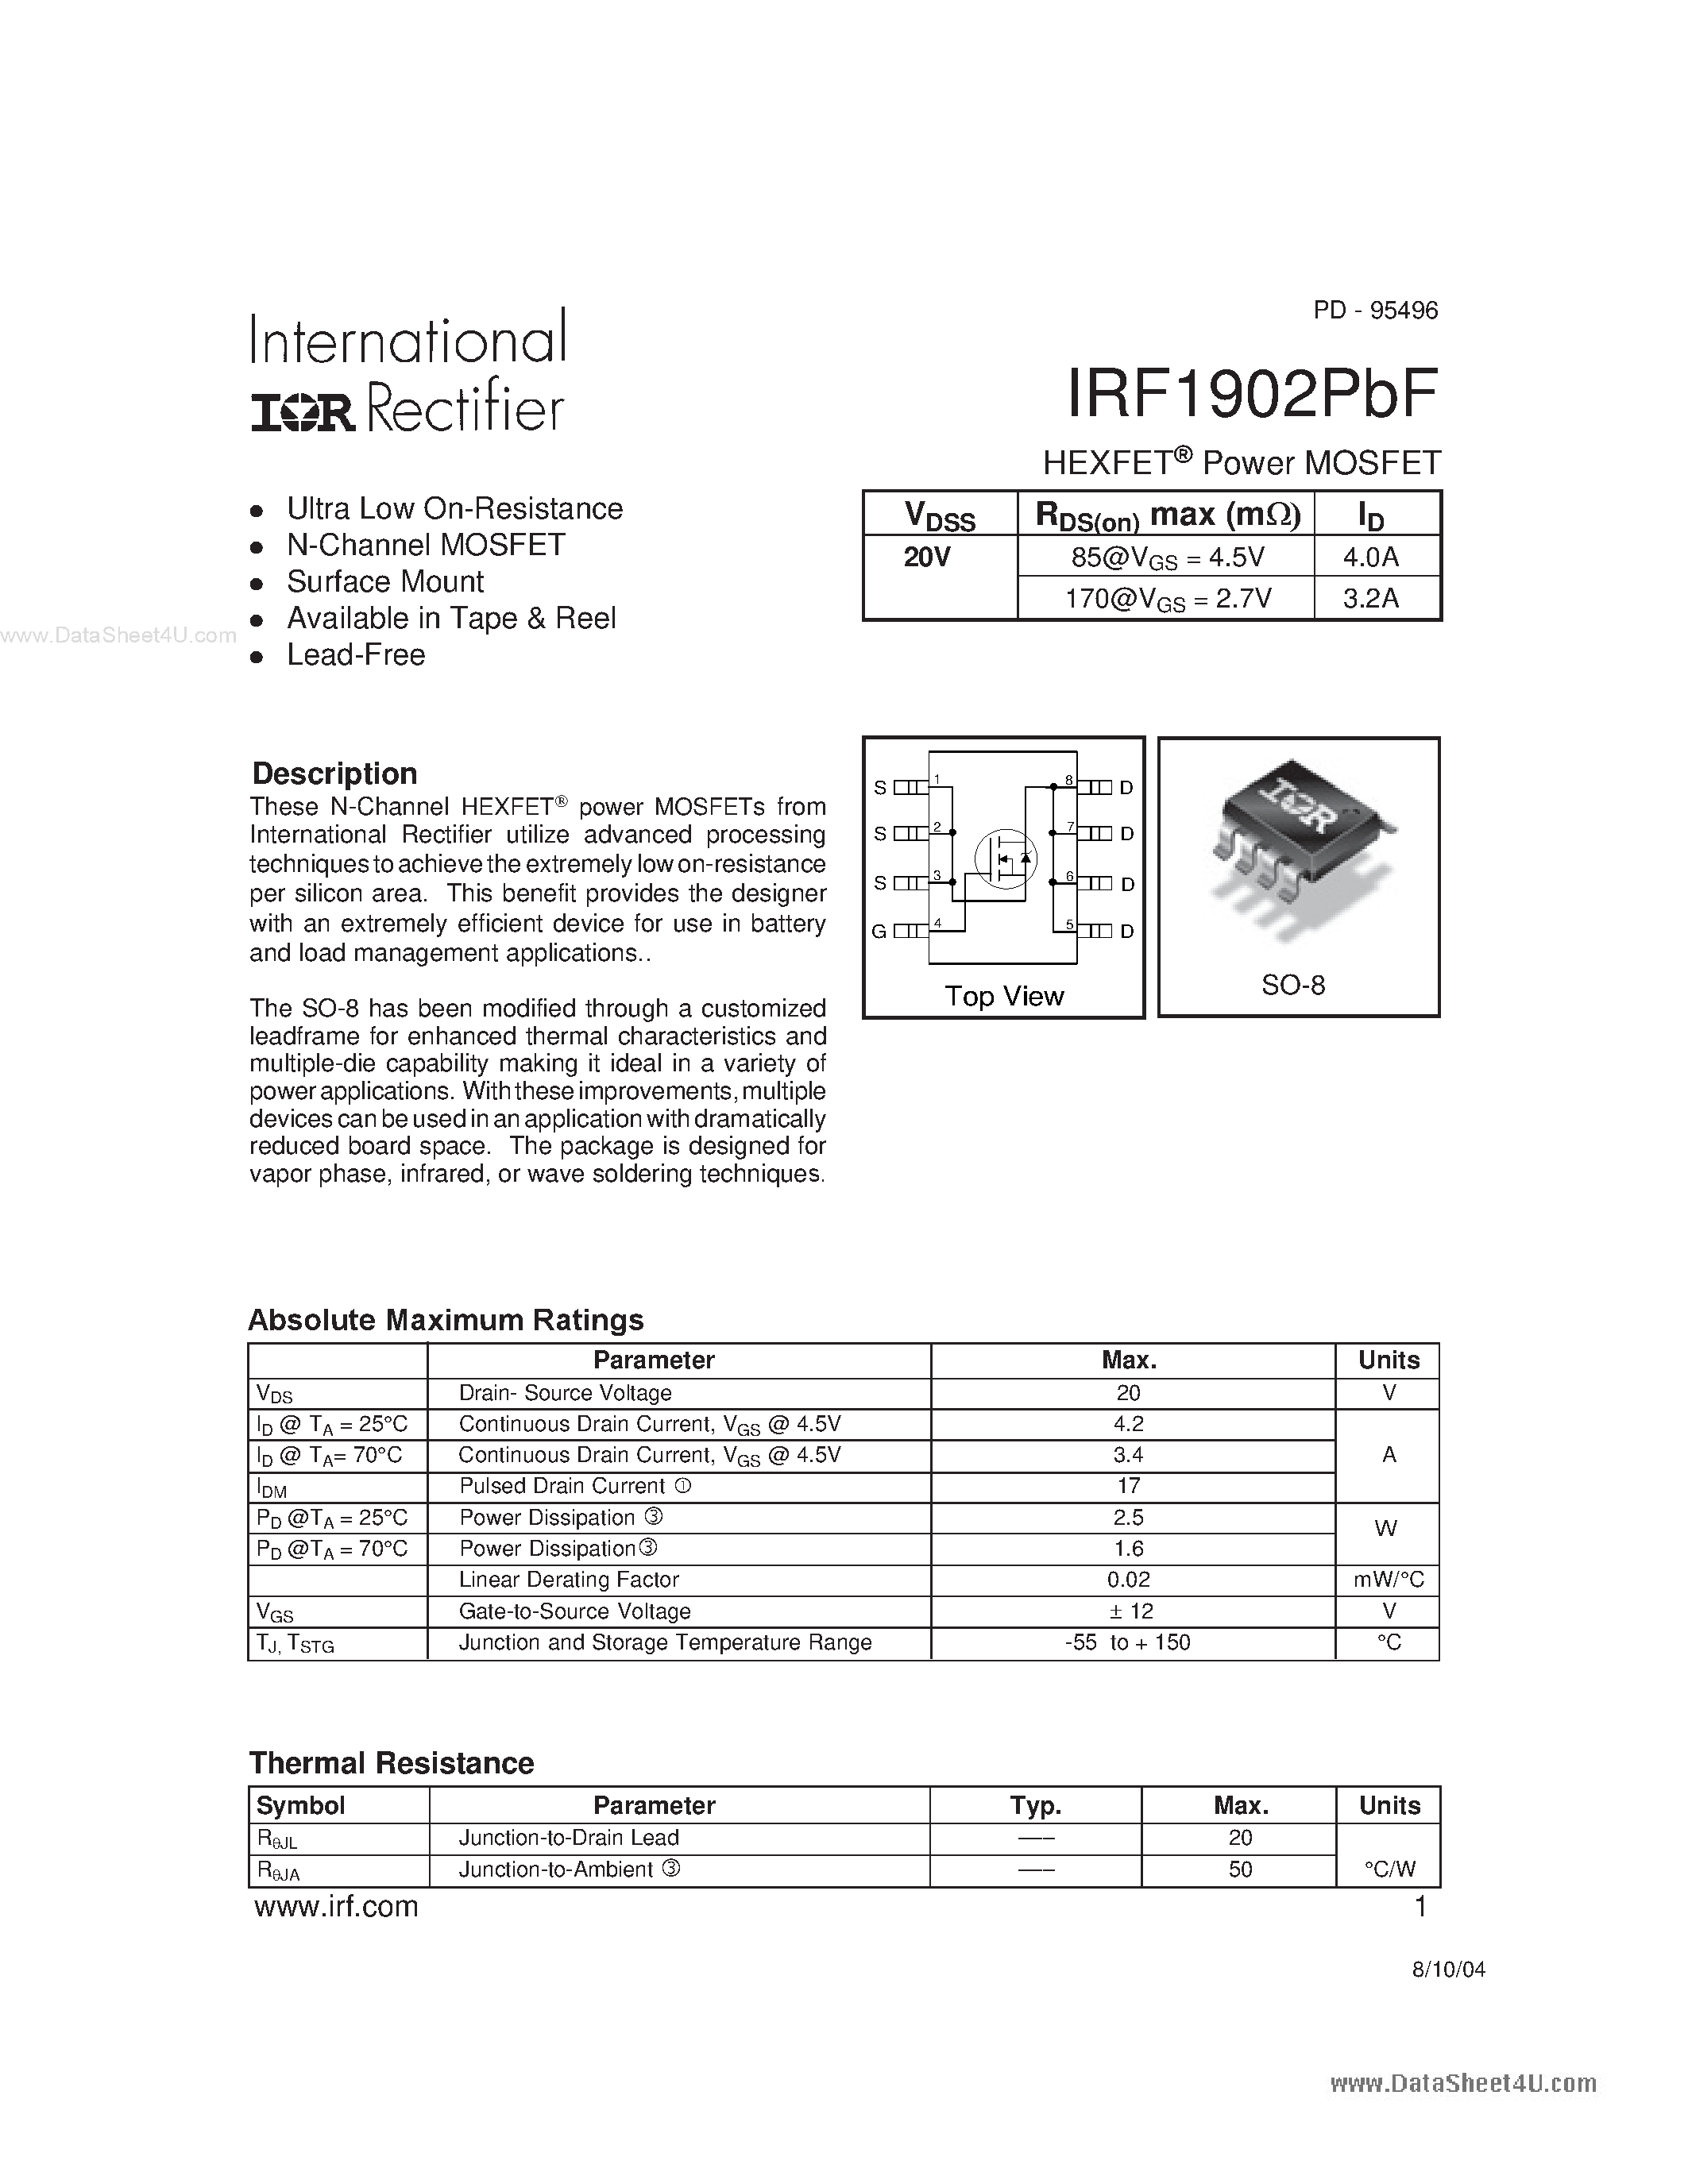 Datasheet IRF1902PBF - HEXFET Power MOSFET page 1